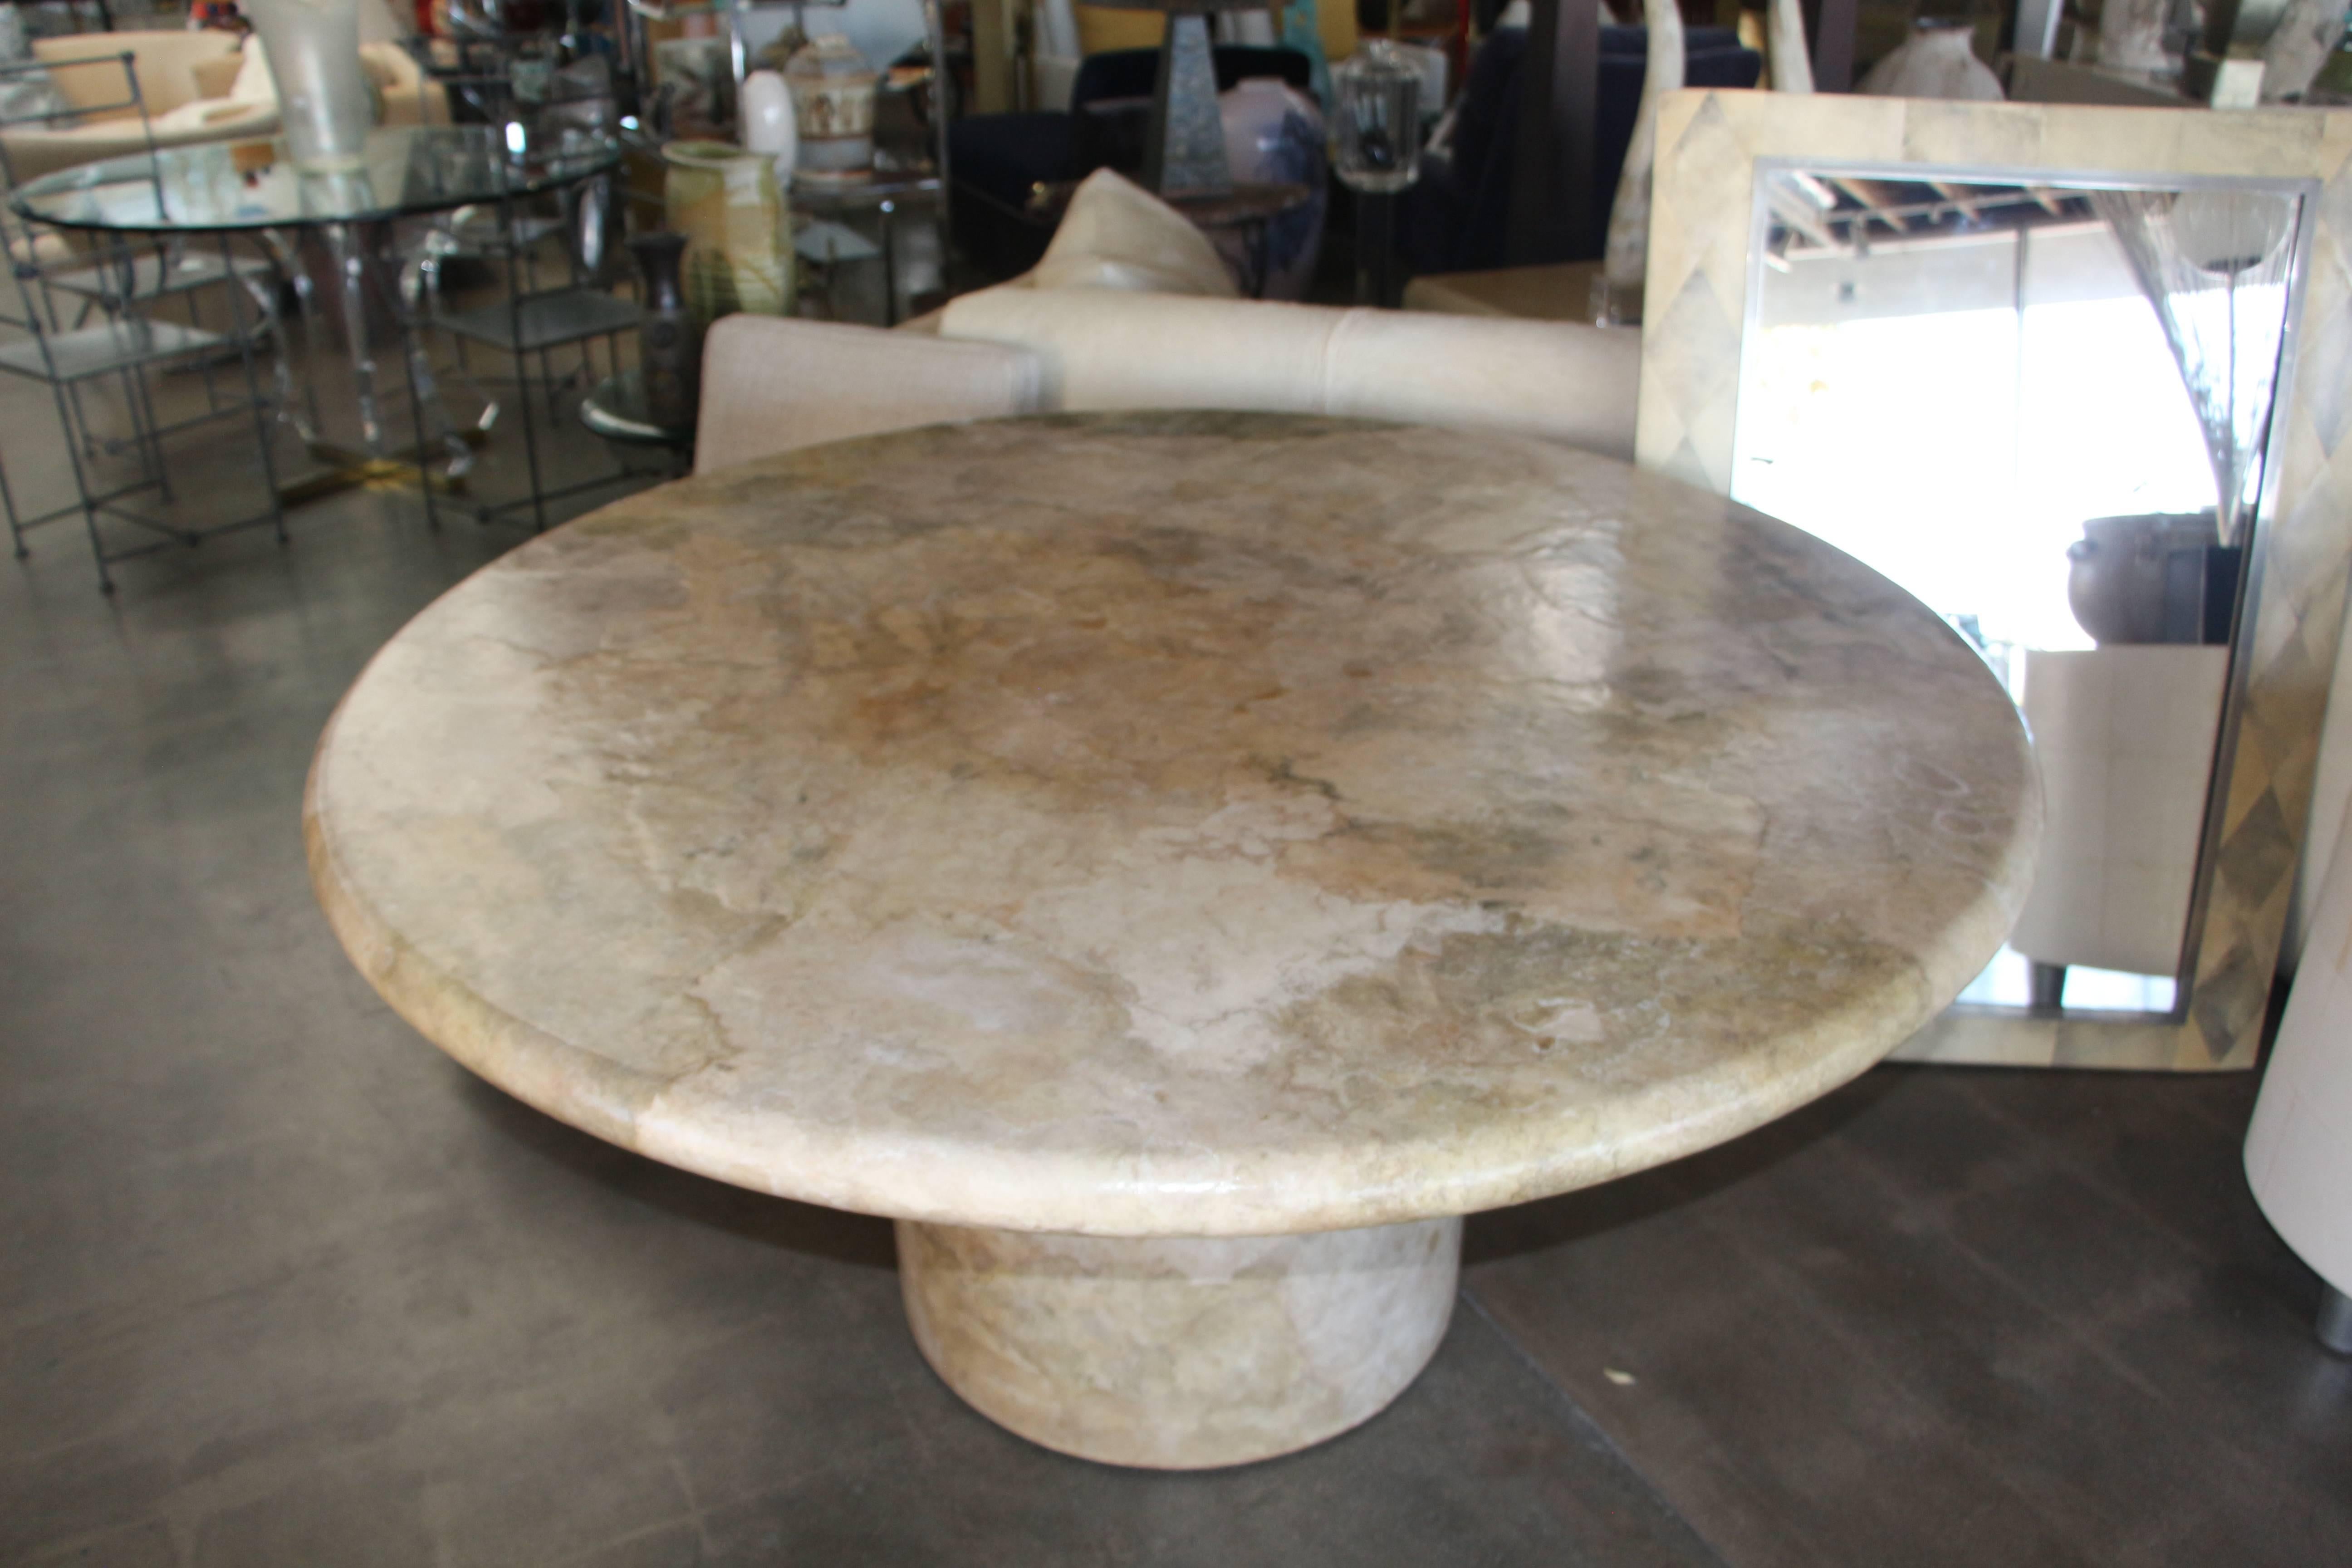 A round paper or parchment layered dining table designed by Steve Chase. An unusual design. In good condition with minor wear and imperfections.